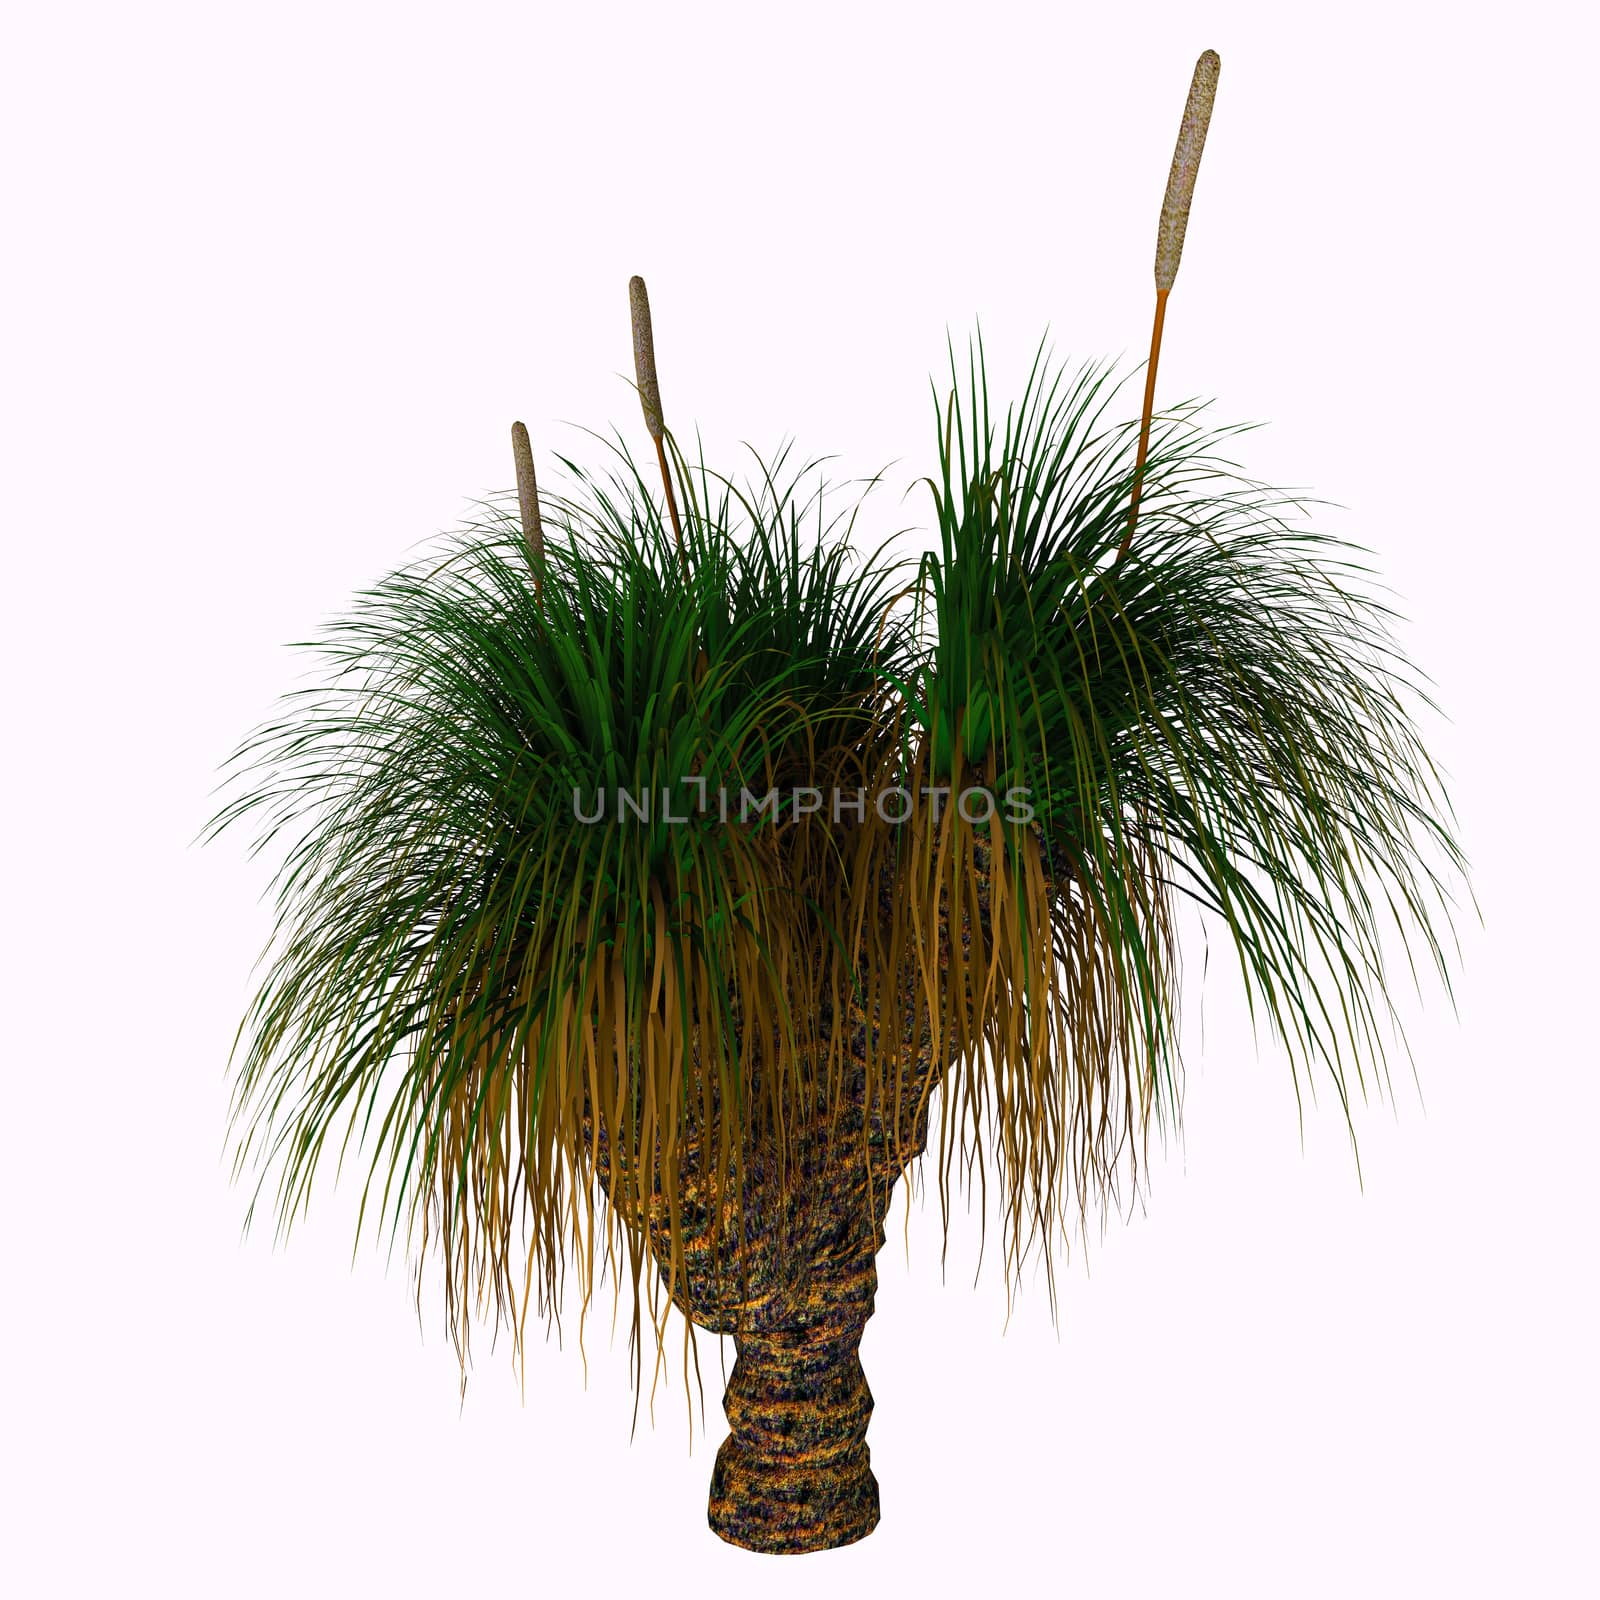 Xanthorrhoea australis, the Grass-tree or Black Boy is an Australian plant. It is the most commonly seen species of the genus Xanthorrhoea. 